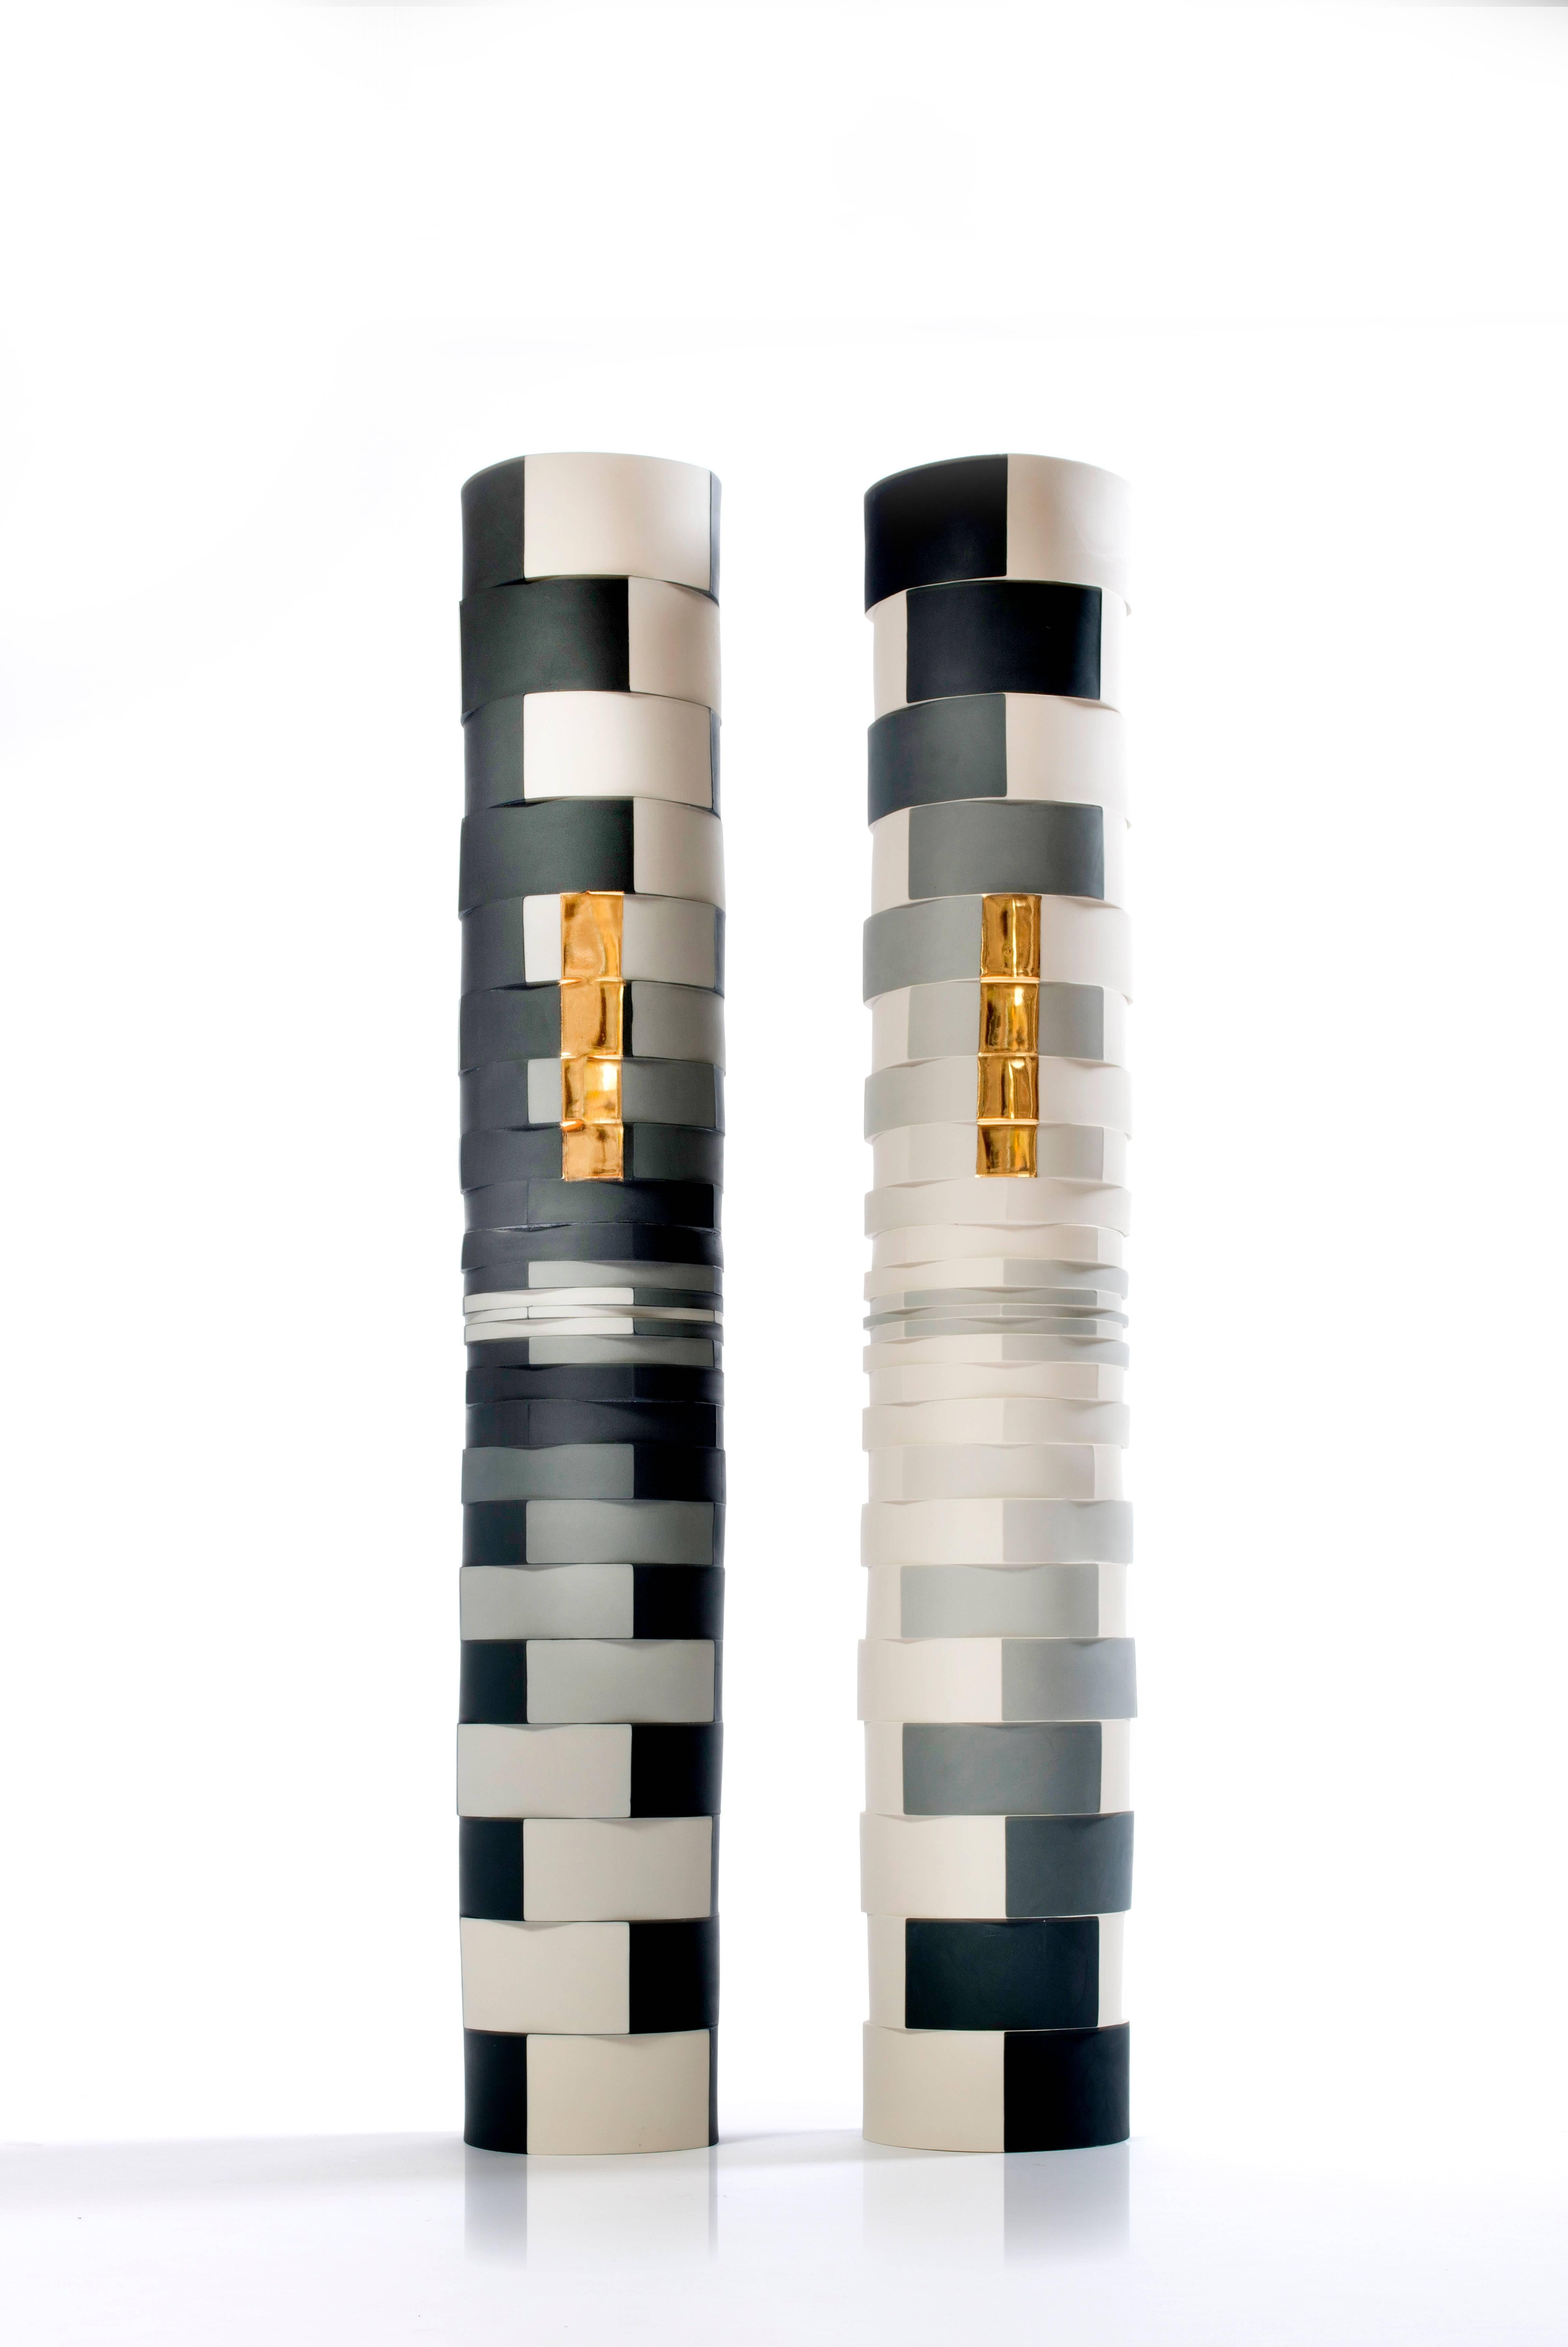 Optically mesmerizing and expertly crafted unique colored porcelain and gold luster columns by artist Peter Pincus. Each column is 6.25 x 6.25 x 38.5 inches.

Born in Rochester, NY, Peter Pincus is a ceramic artist and instructor.  He joined the